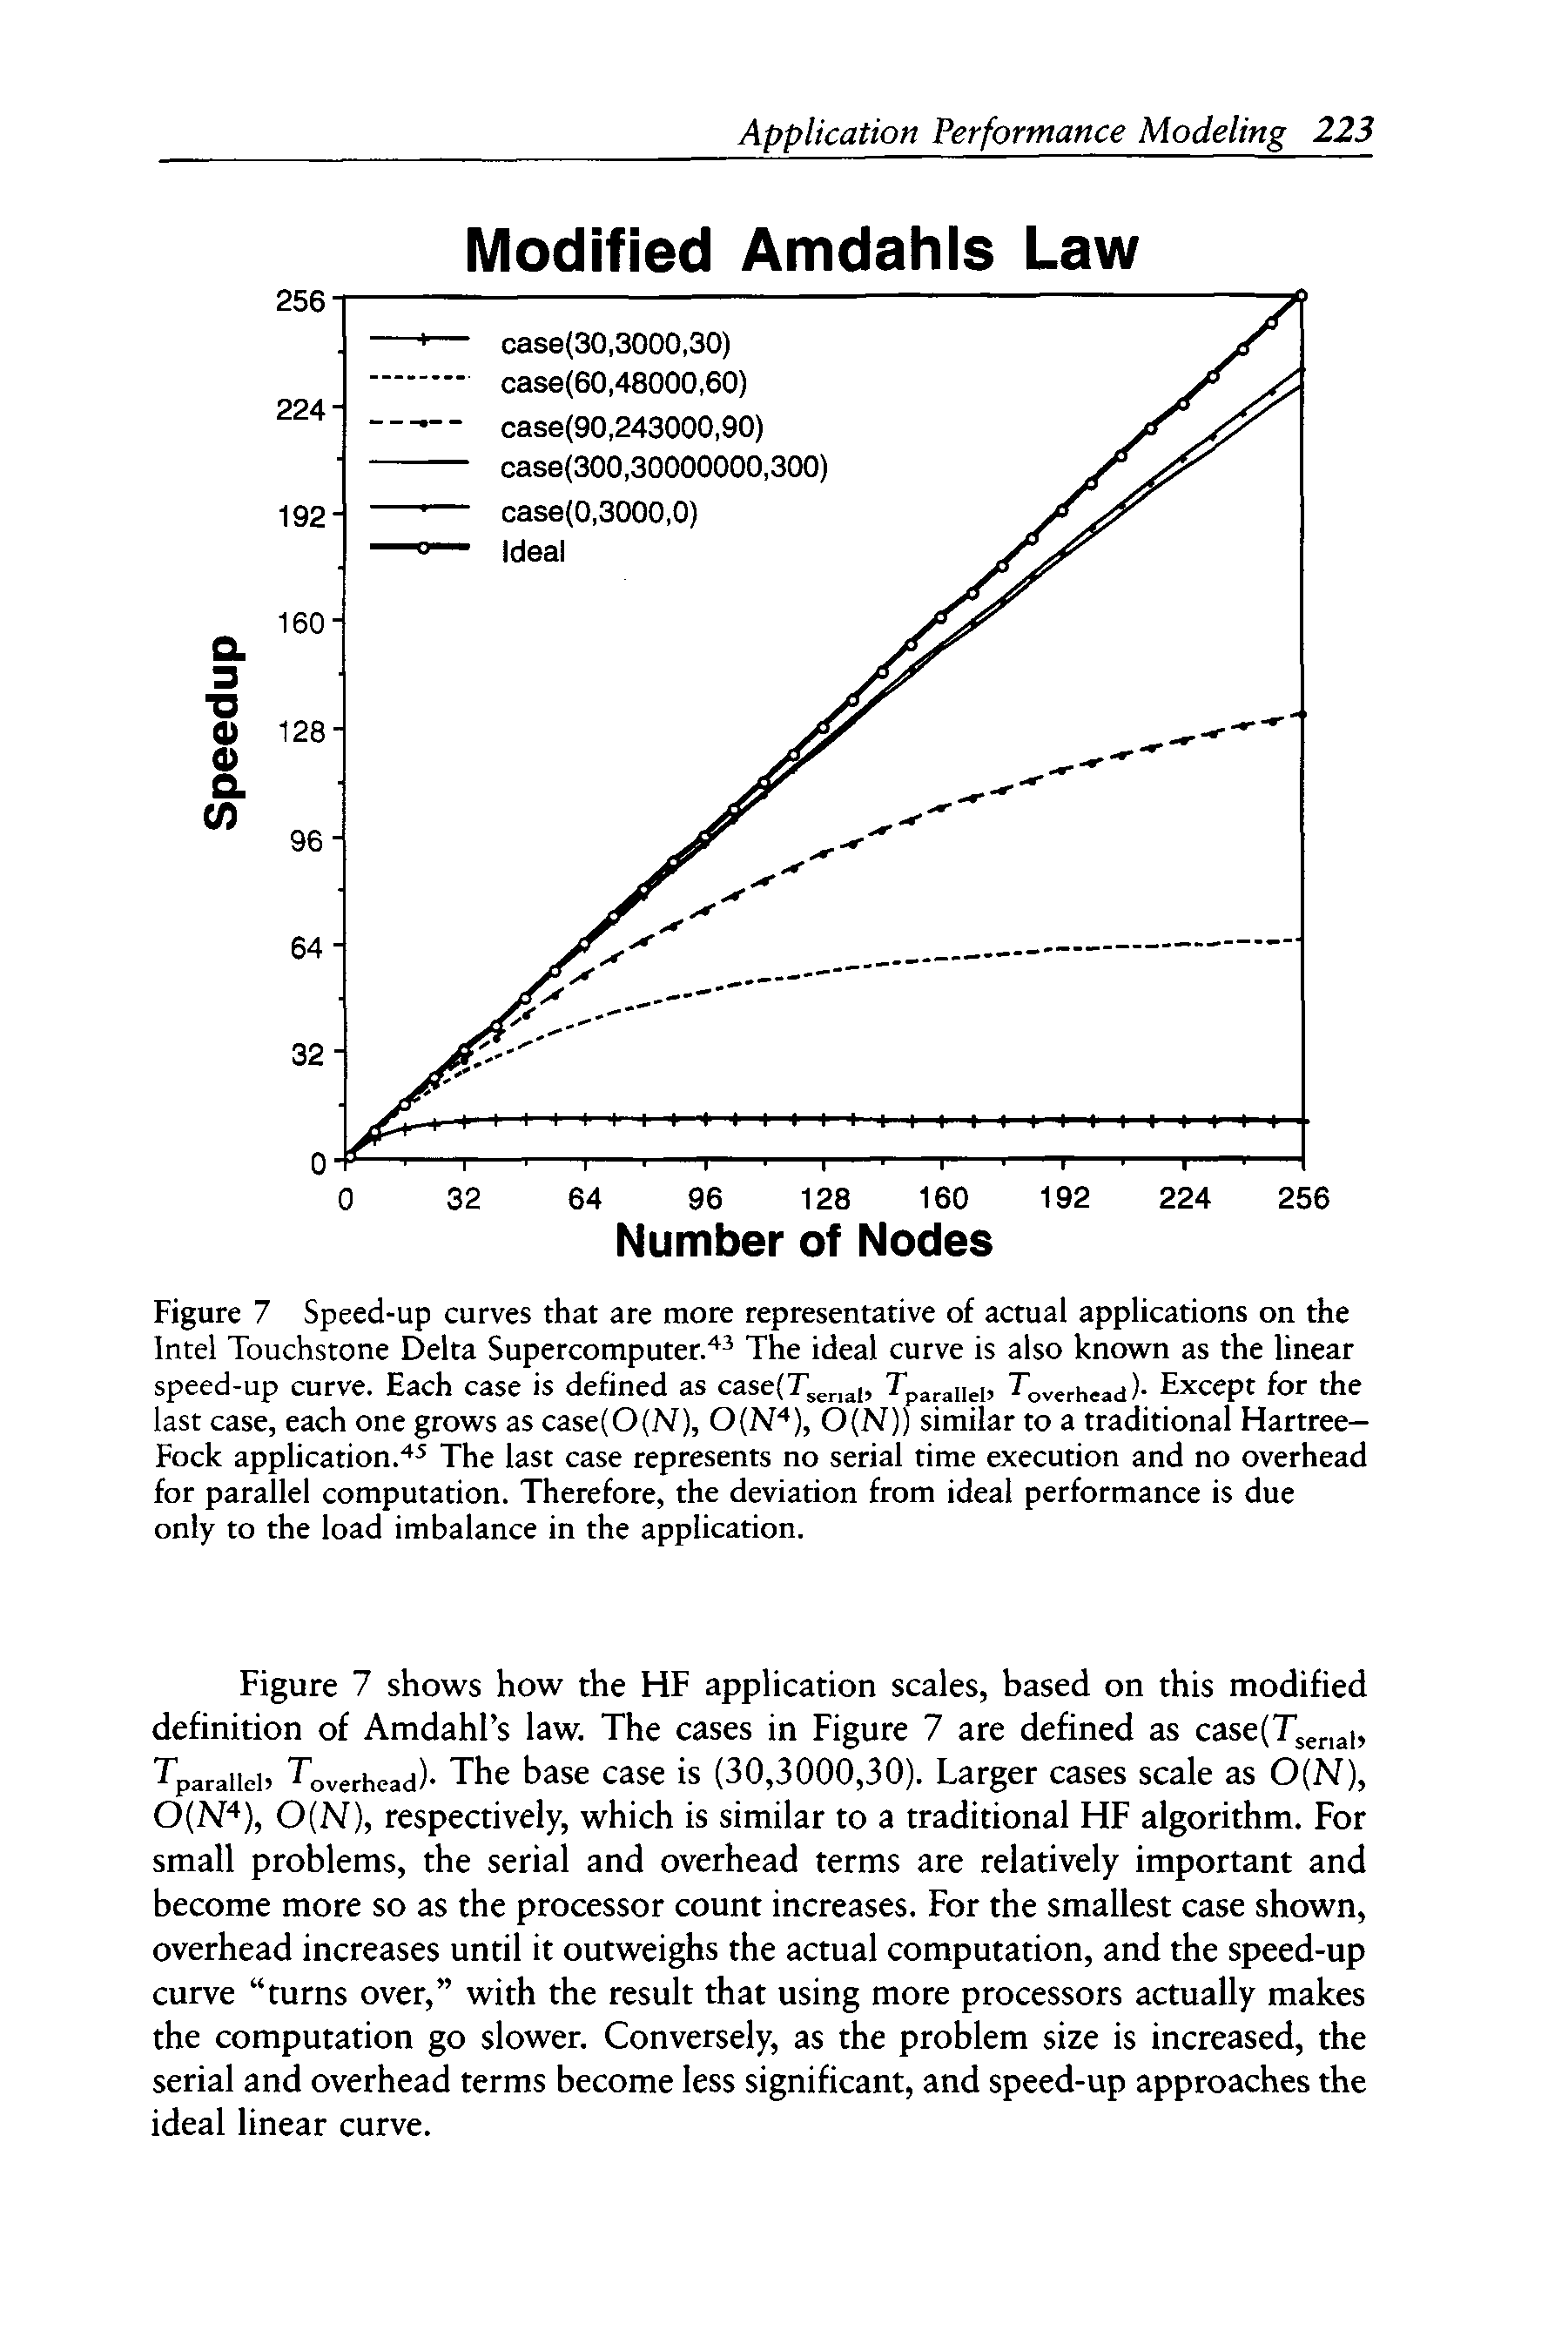 Figure 7 Speed-up curves that are more representative of actual applications on the Intel Touchstone Delta Supercomputer. The ideal curve is also known as the linear speed-up curve. Each case is defined as casefT. , Tp raiiei overhead)- Except for the last case, each one grows as case(0(N), 0(N ), 0(N)) similar to a traditional Hartree— Fock application. The last case represents no serial time execution and no overhead for parallel computation. Therefore, the deviation from ideal performance is due only to the load imbalance in the application.